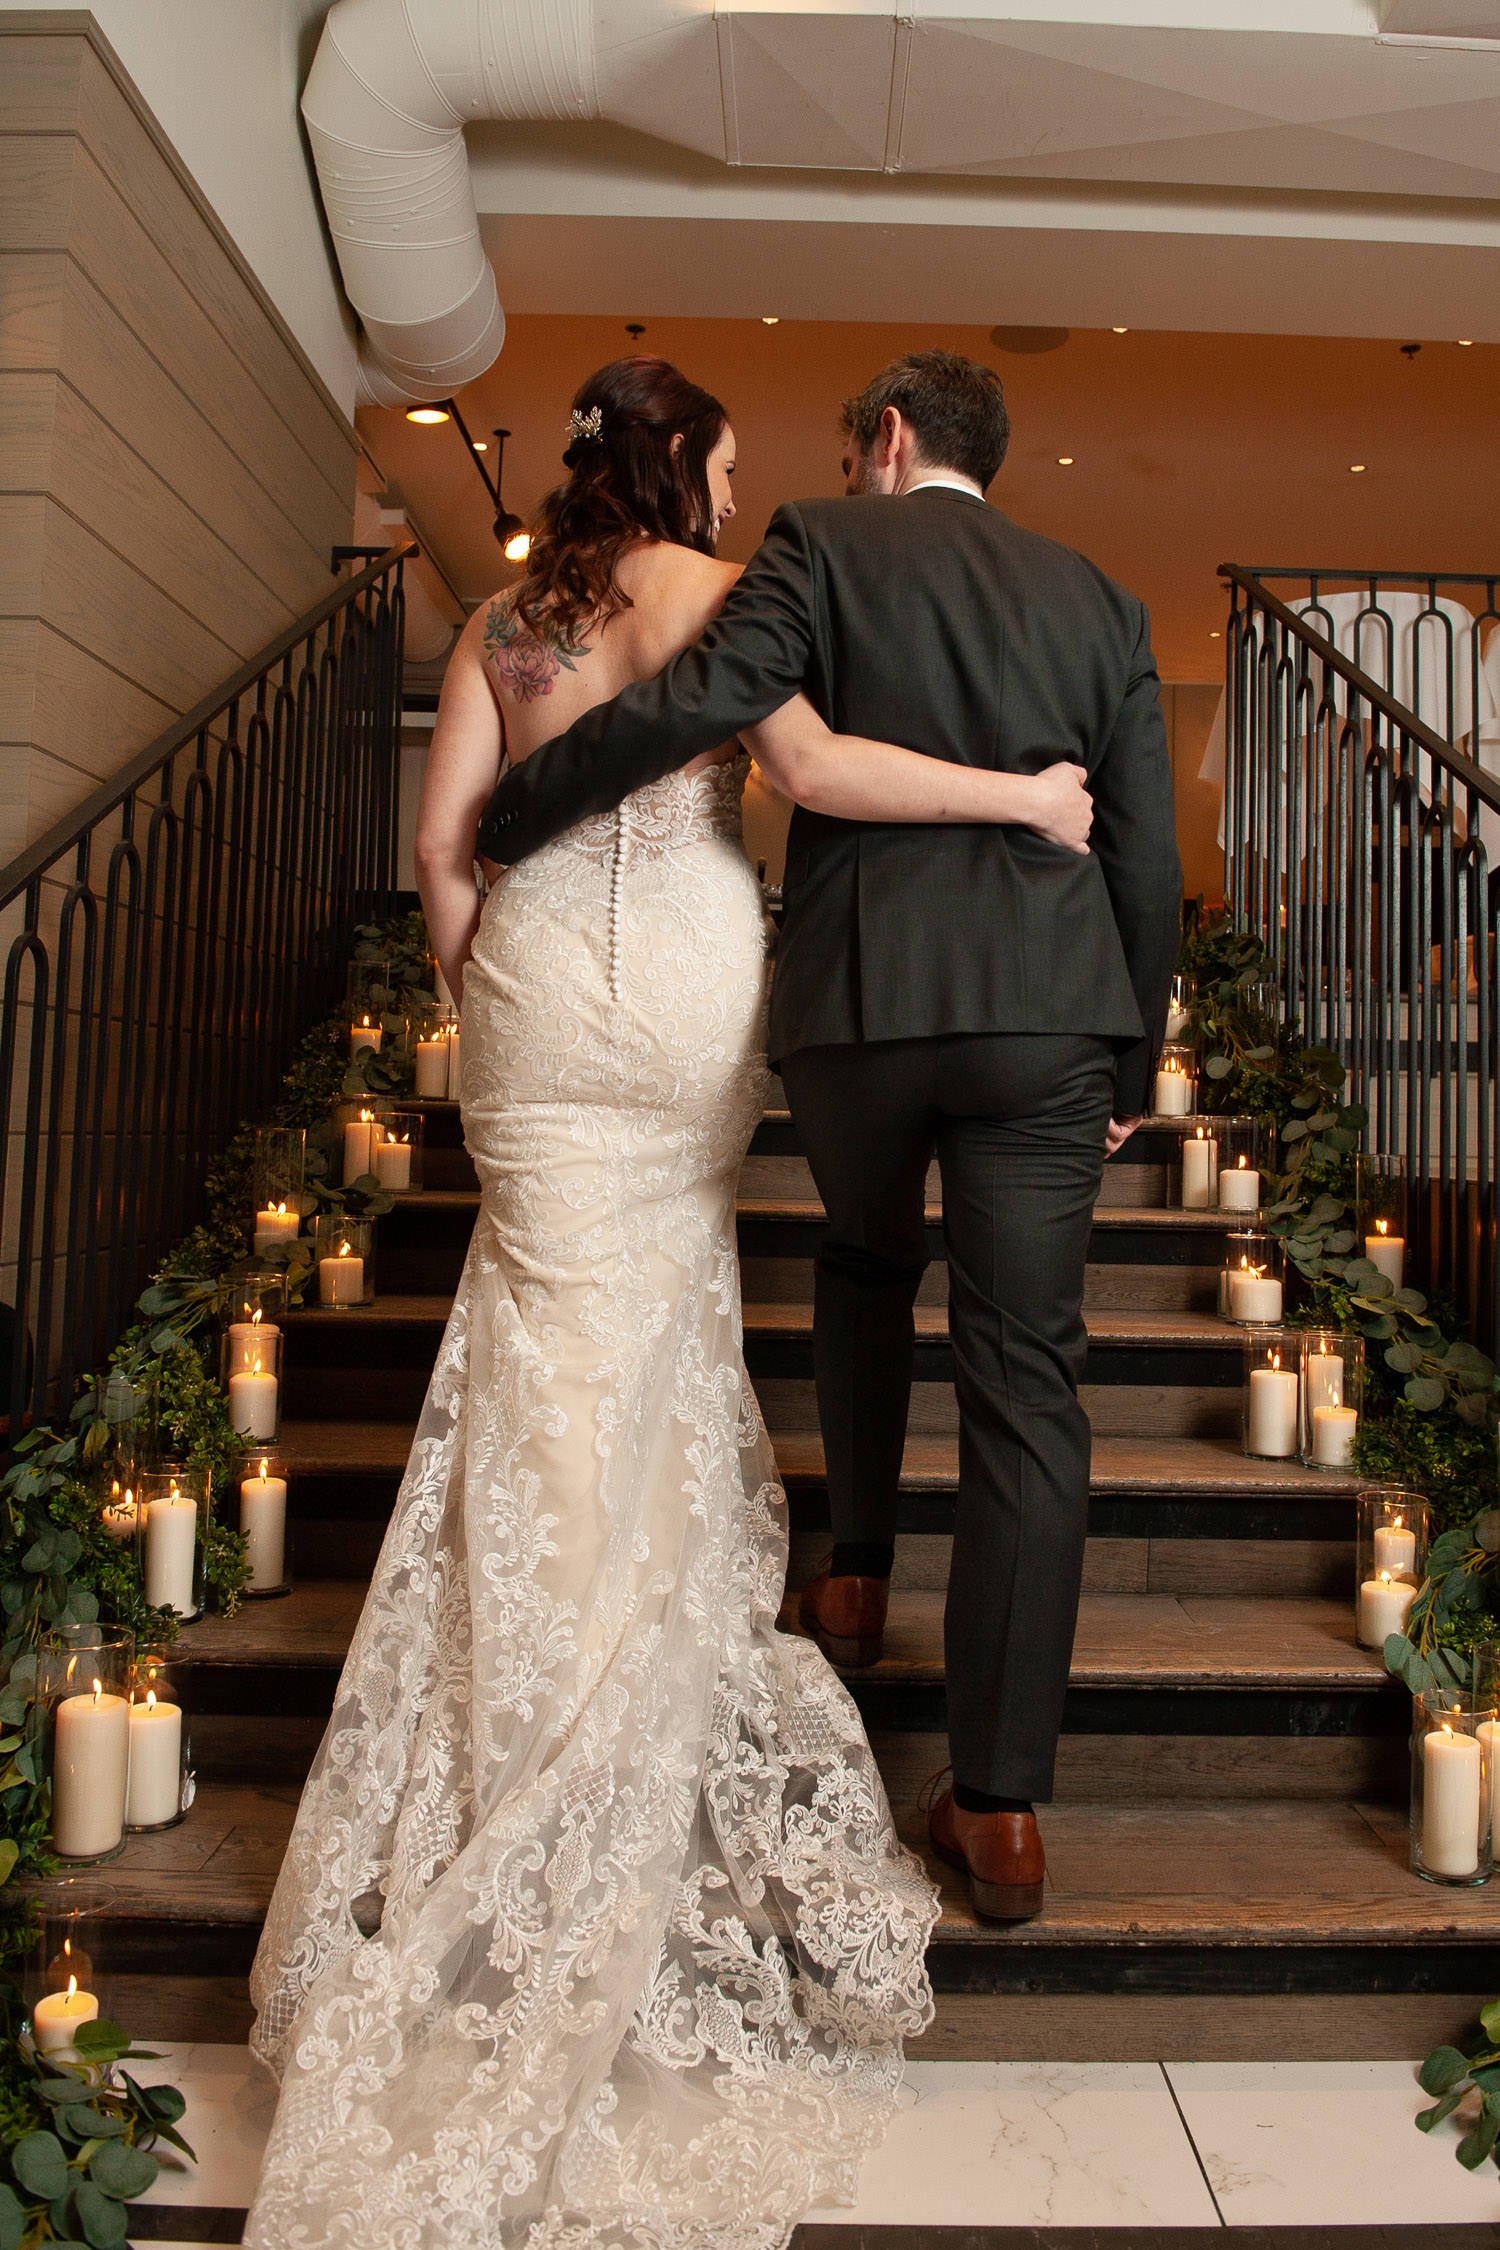 Winter wedding at Alforno in Calgary captured by Tara Whittaker Photography